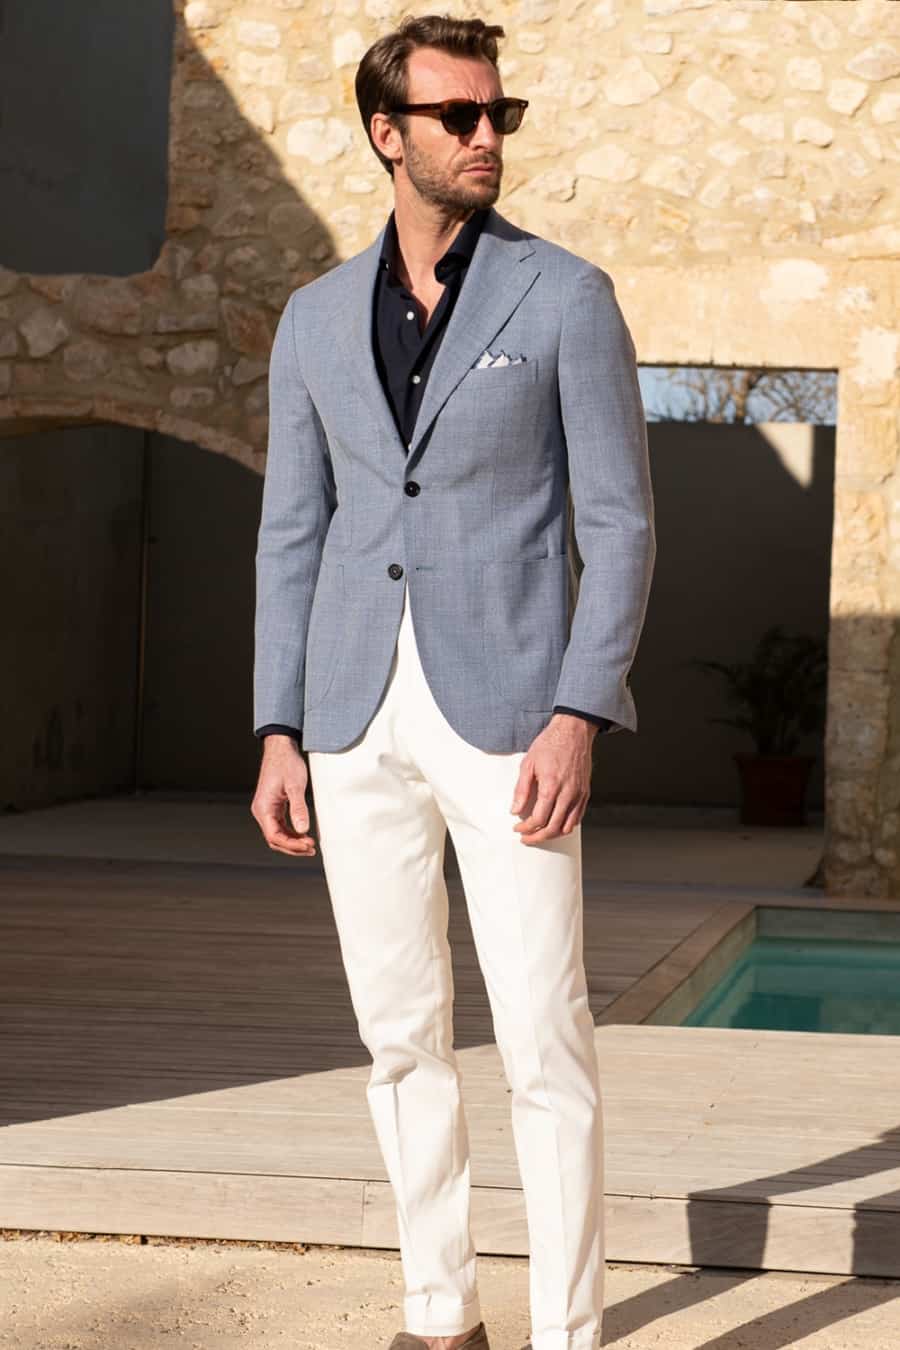 Men's tailored white pants, blue blazer and navy shirt outfit